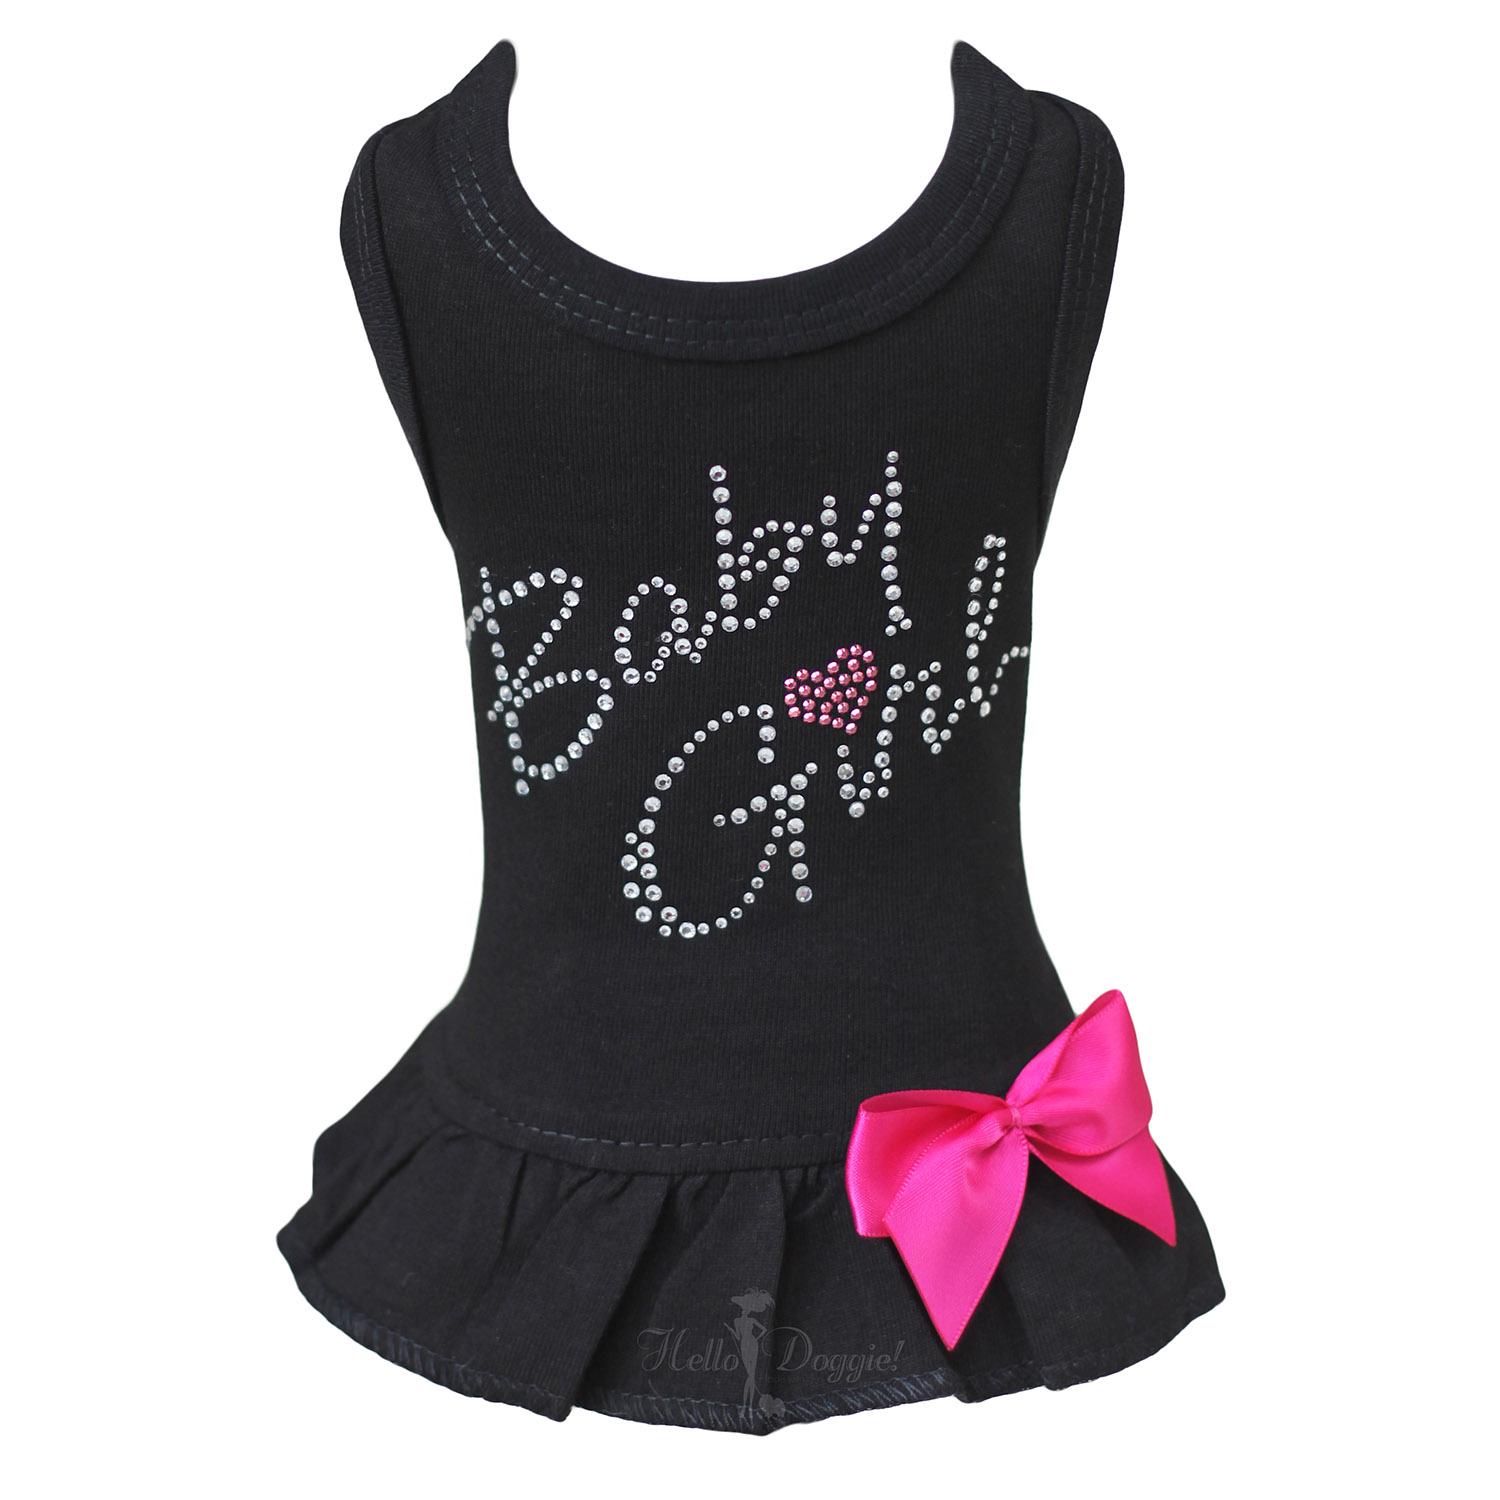 Hello Doggie Baby Girl Dog Dress - Black with Pink Bow